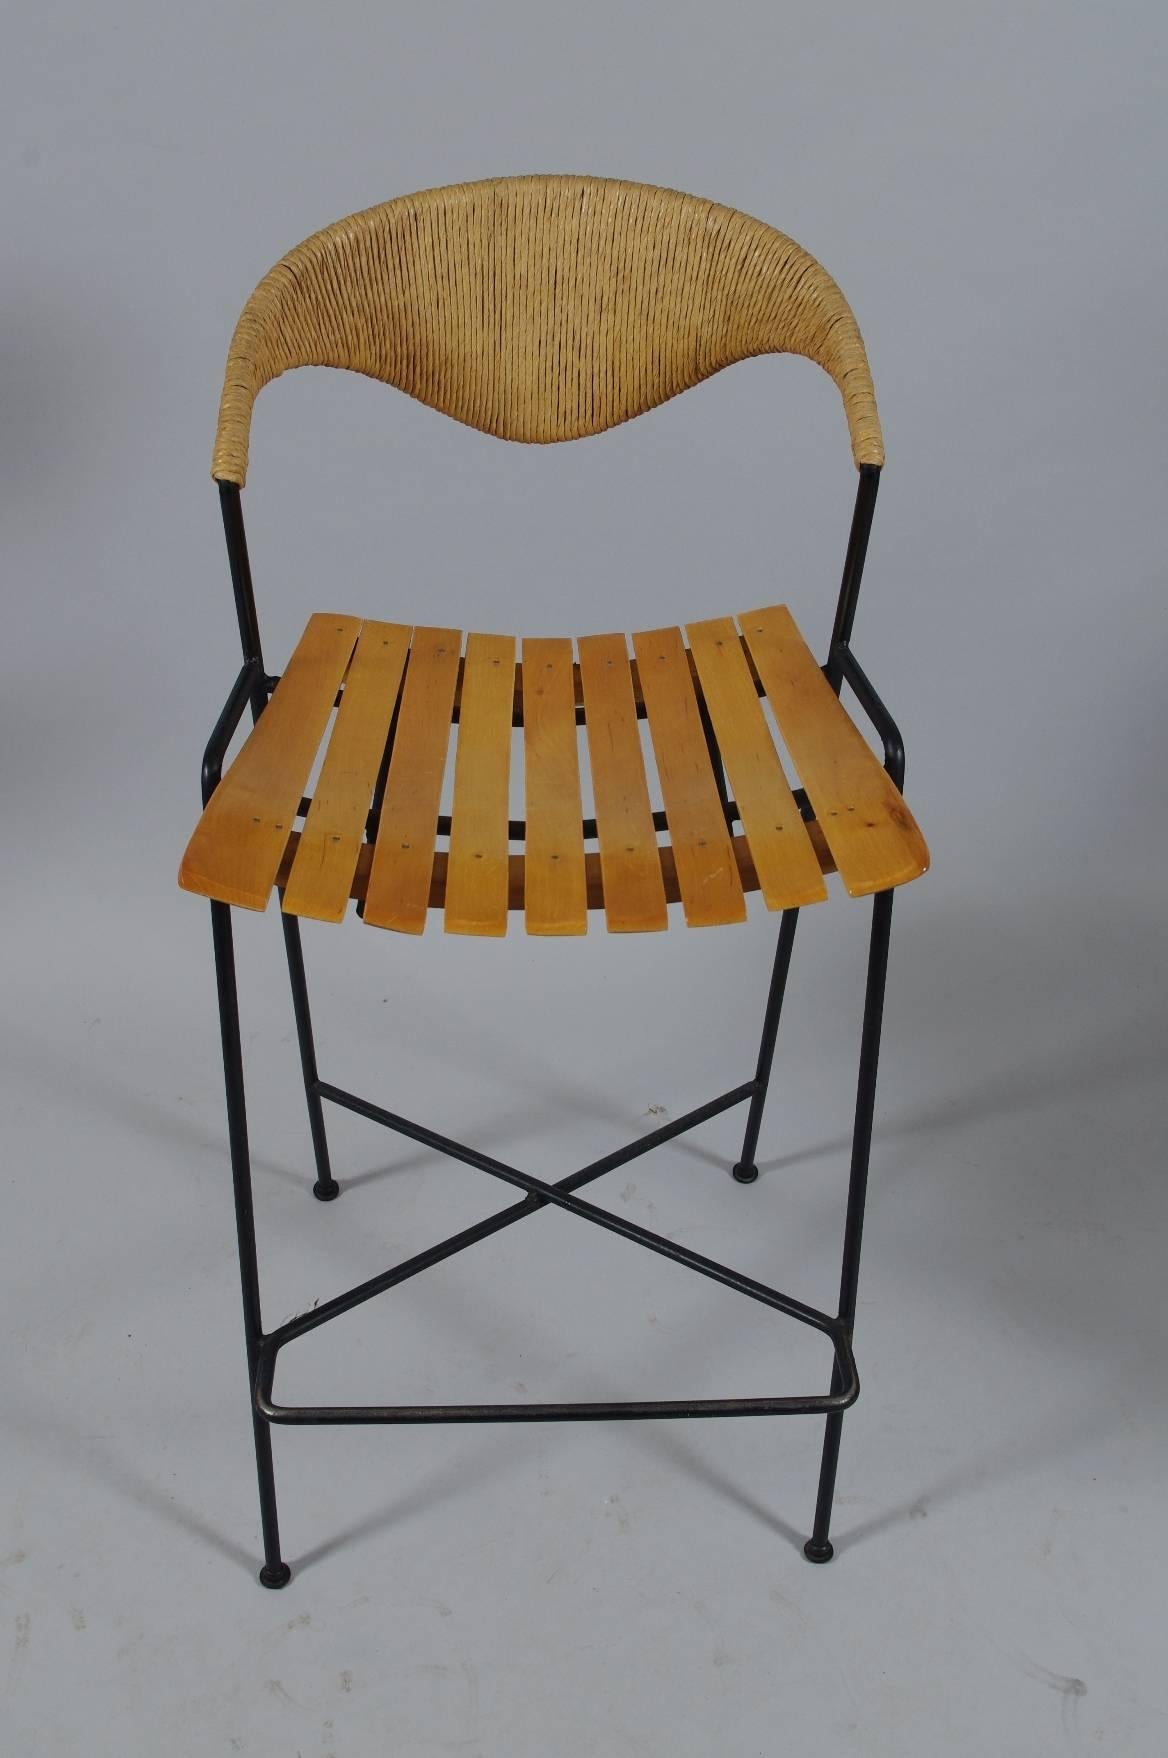 Set of three iron bar stools designed by Arthur Umanoff, each with a curved back wrapped in raffia over the slat seat (maple); the legs joined by a hairpin stretcher.

These comfortable chairs are in wonderful condition. They have never been